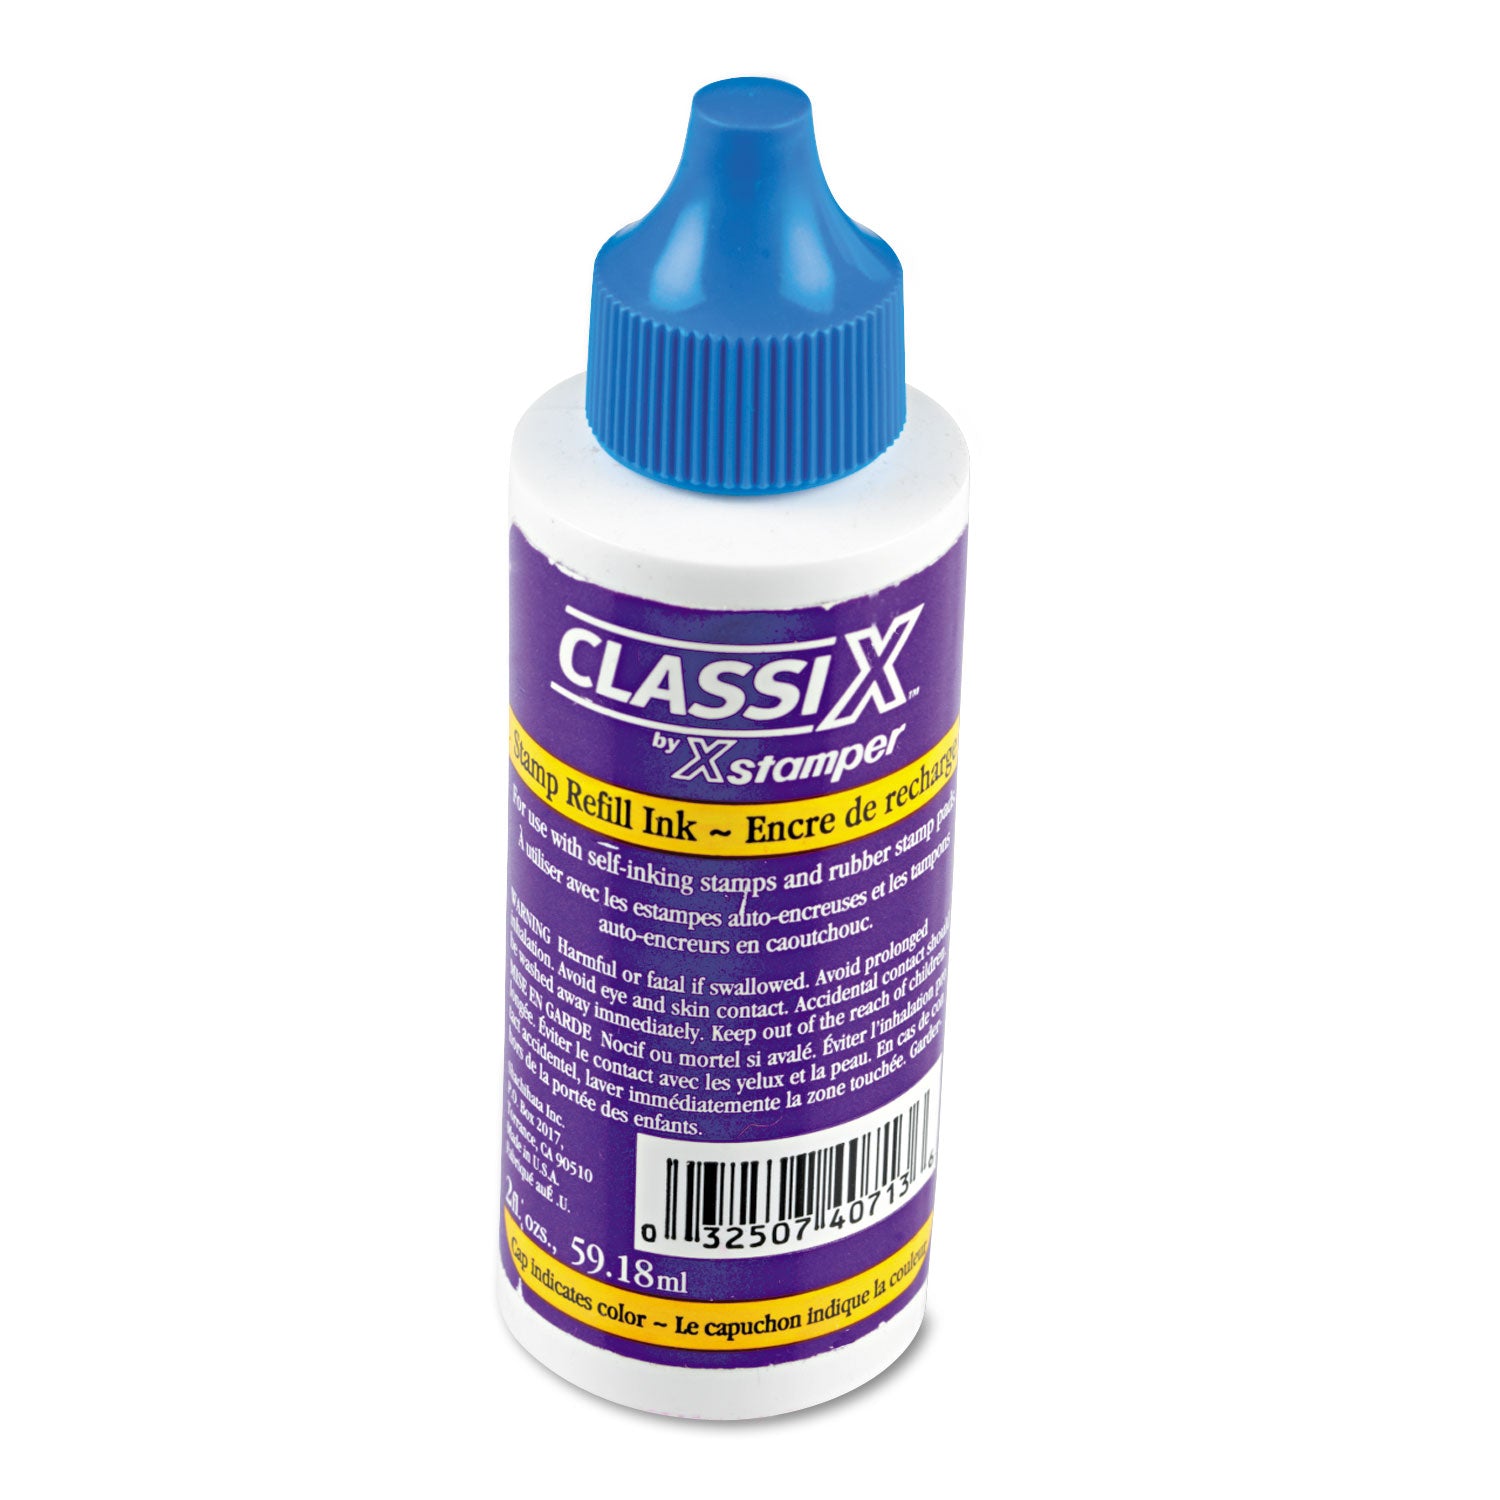 Refill Ink for Classix Stamps, 2 oz Bottle, Blue - 